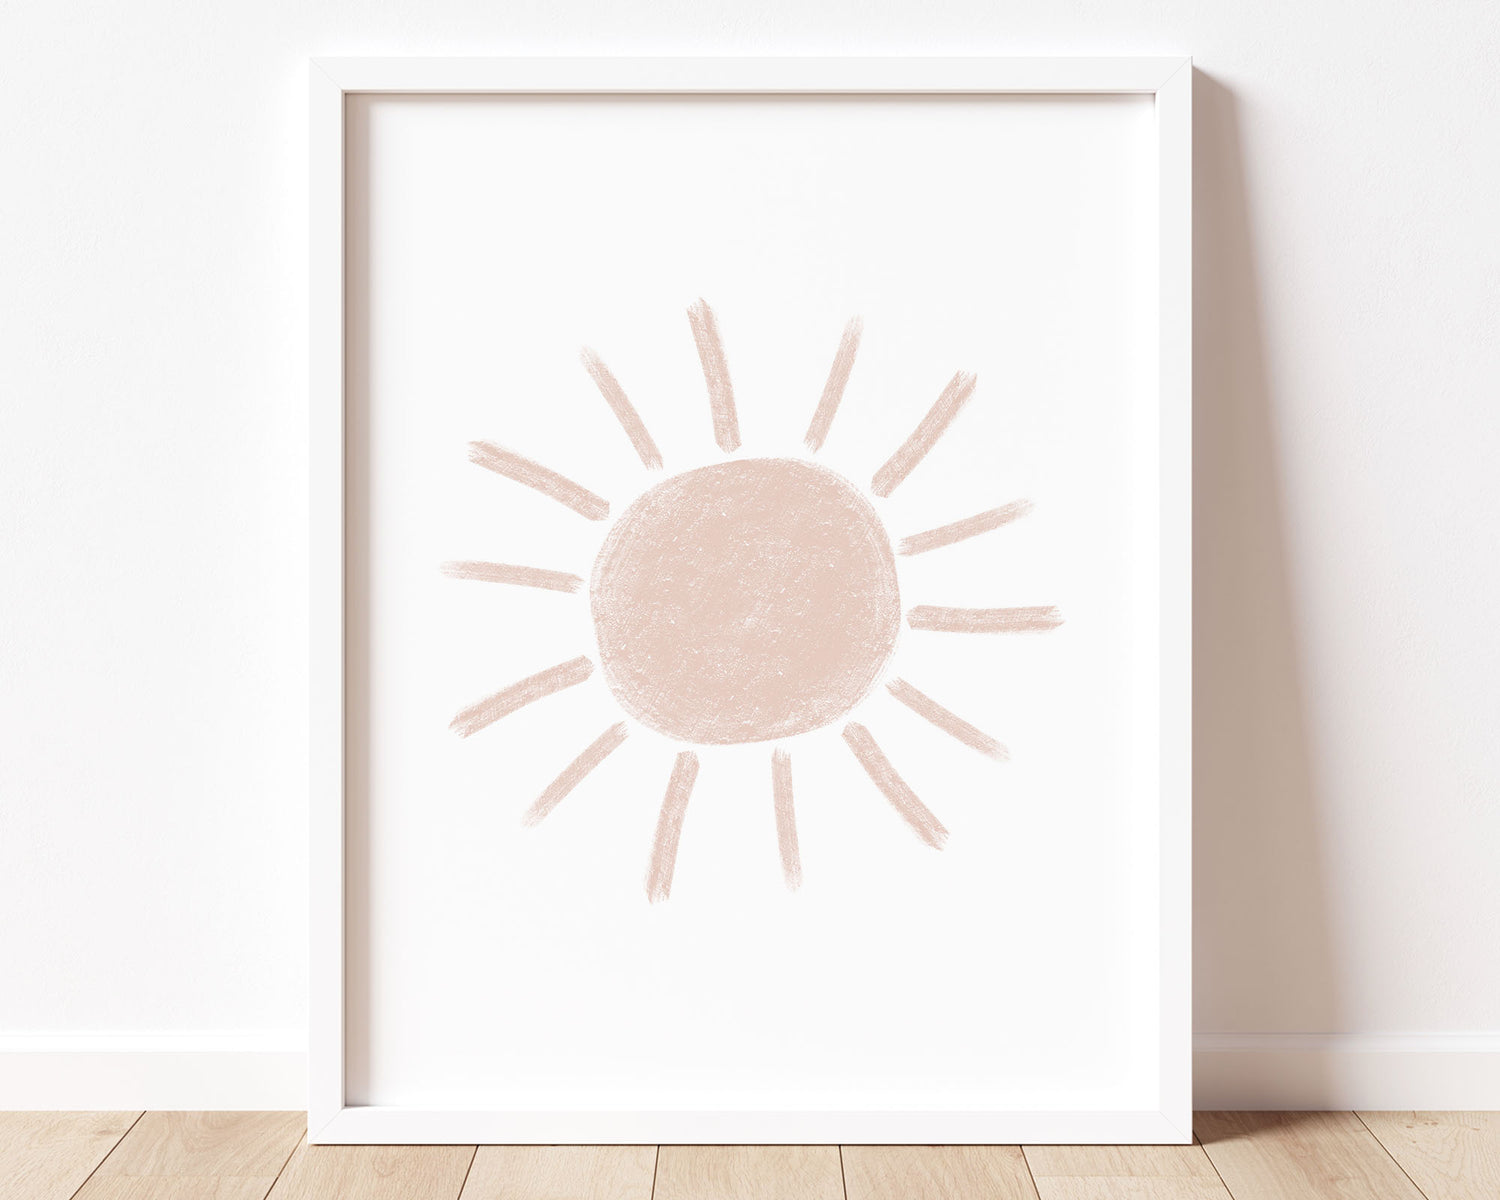 Blush pink abstract sun in chalky brushstroke illlustration style perfect for Baby Nursery Décor, Little Boys Bedroom Wall Art, Toddler Girls Room Wall Hangings, Kiddos Bathroom Wall Art and Childrens Playroom Décor.